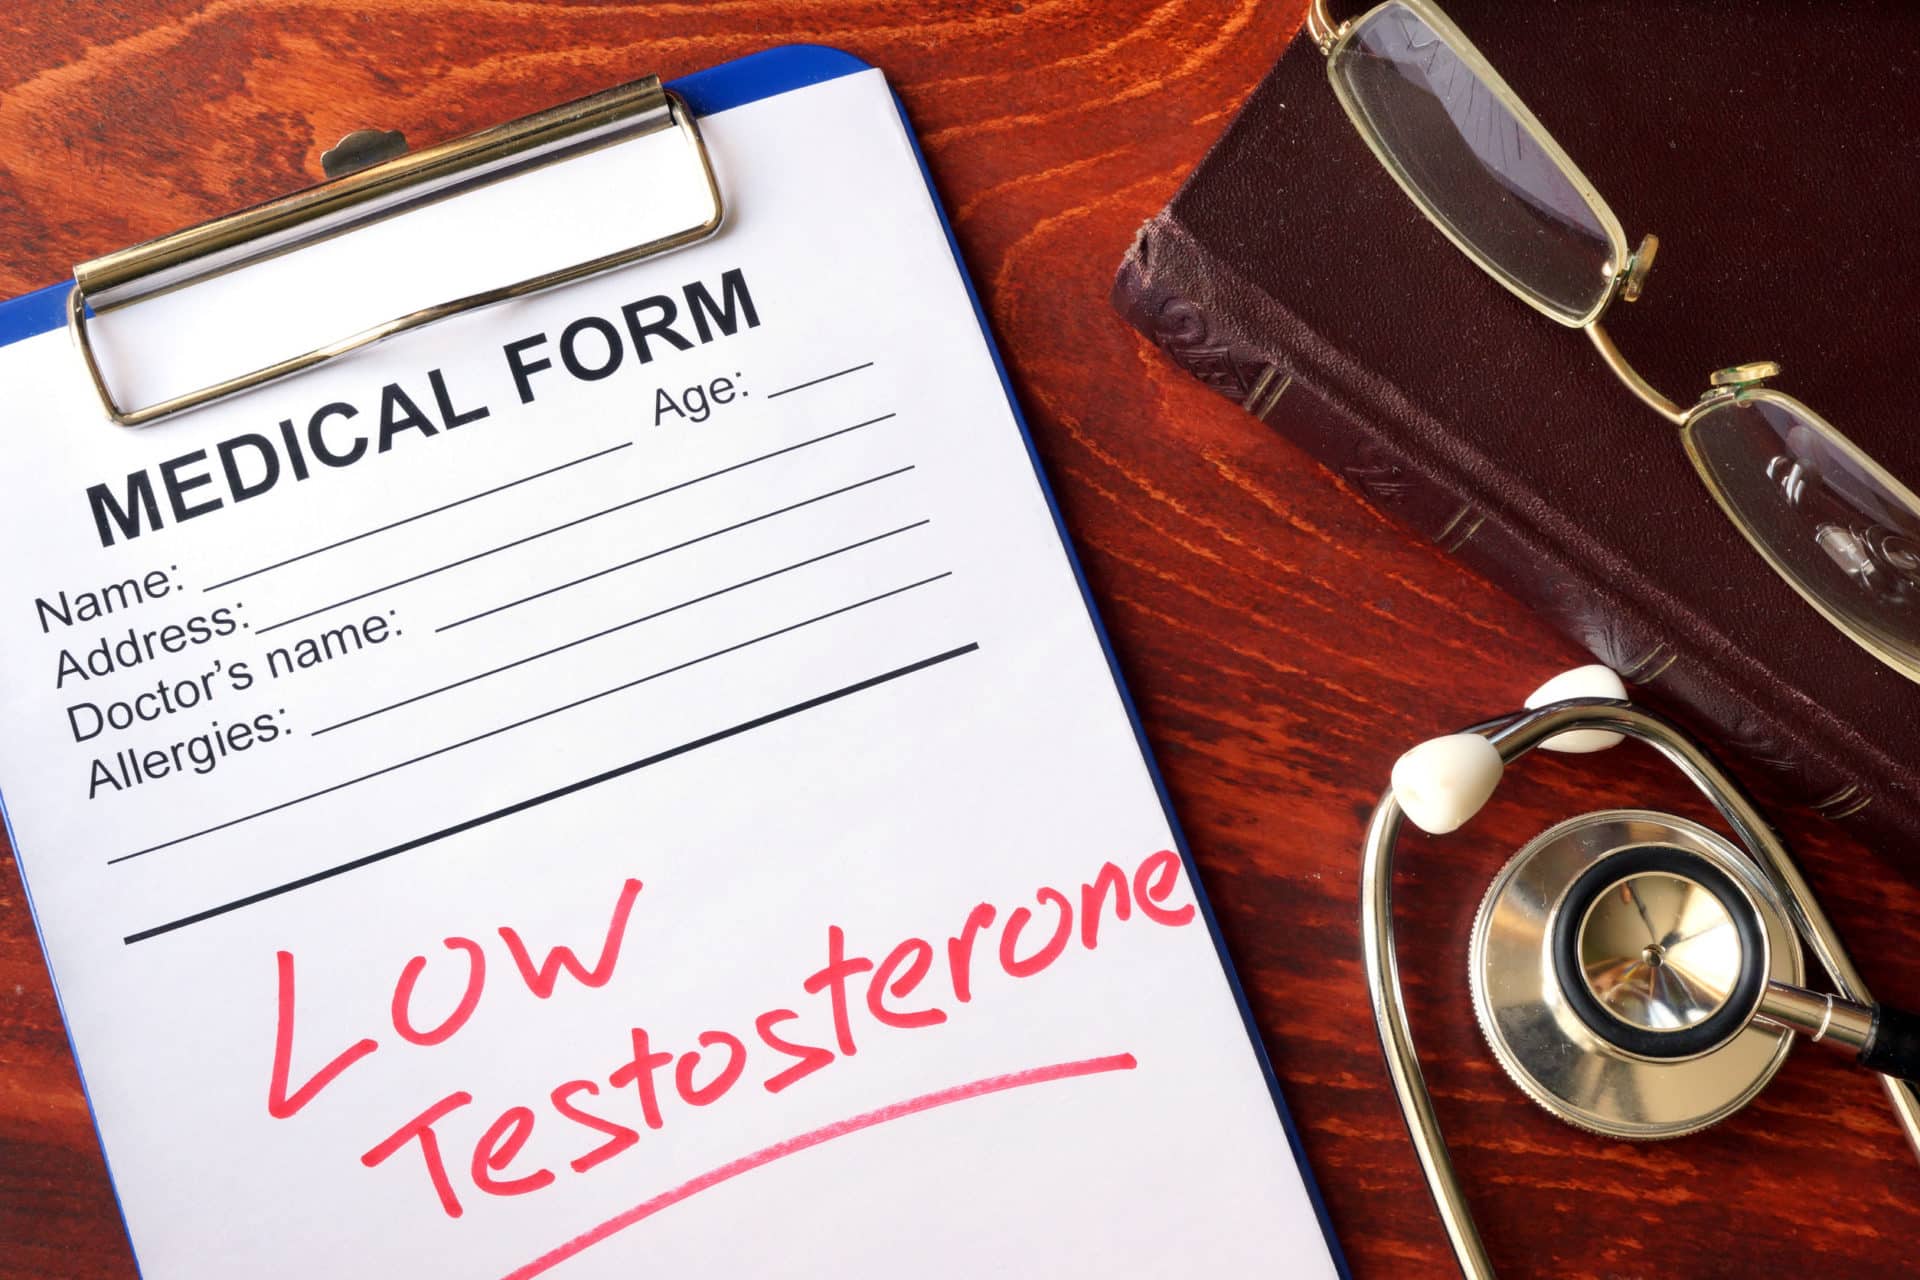 New Yorkers Suffering from Testosterone Therapy Injuries Are Not Alone